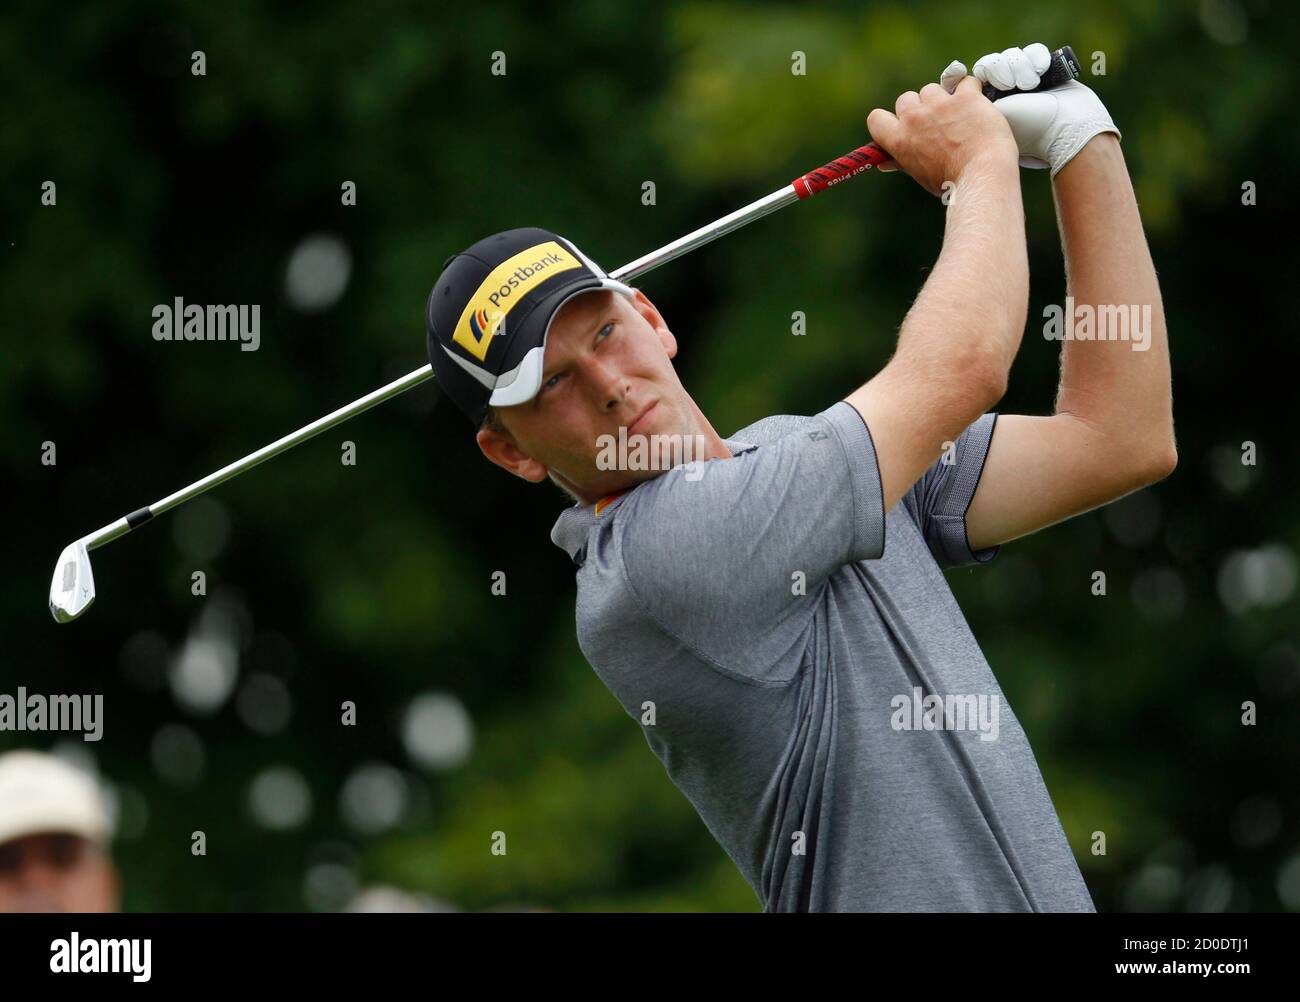 Germany's Marcel Siem tees off a ball at the third hole during the first  day of the International Golf Open in Pulheim near Cologne June 21, 2012.  REUTERS/Ina Fassbender (GERMANY - Tags: